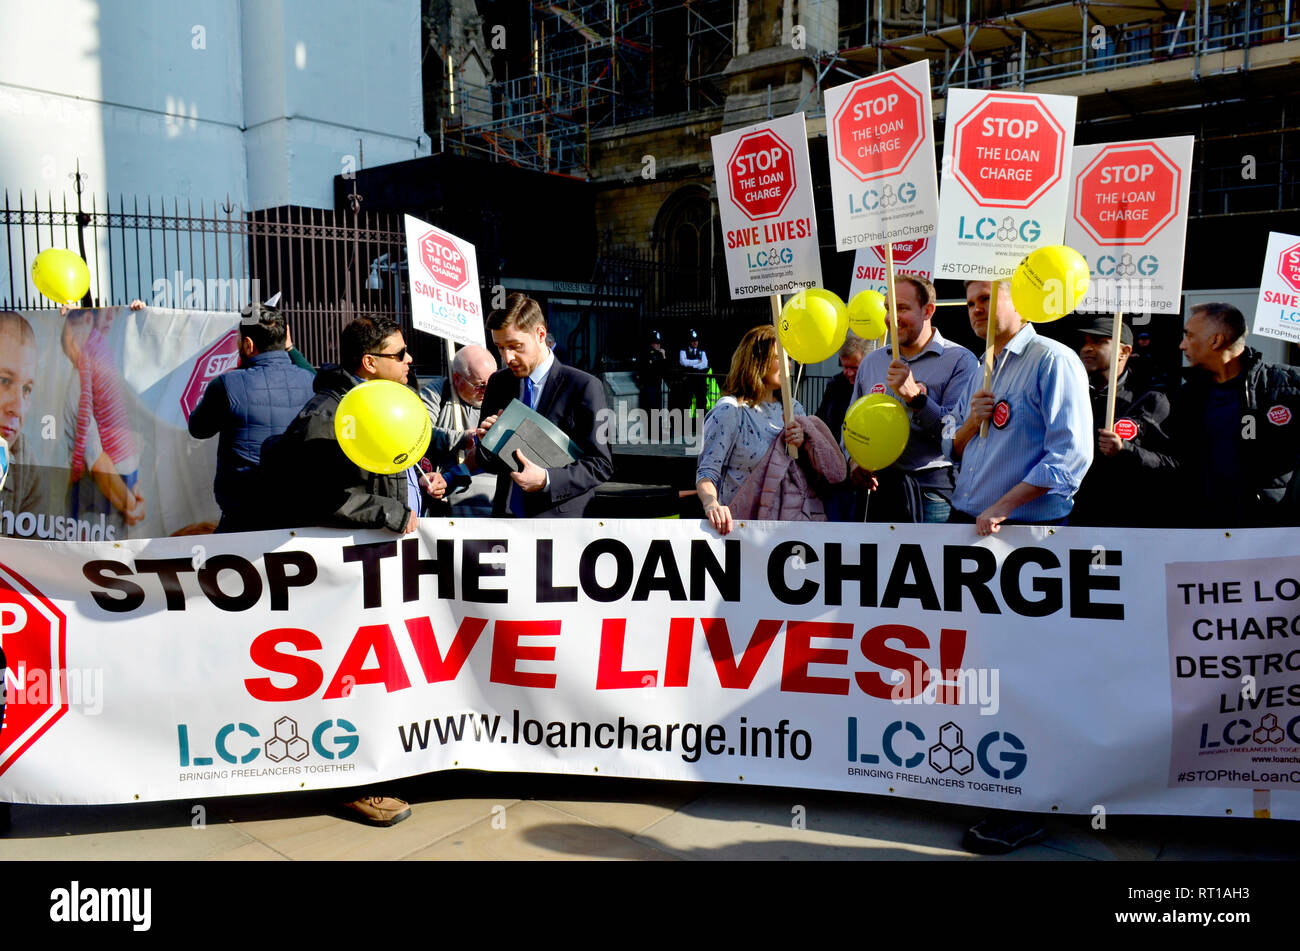 London, 27th Feb. The Loan Charge Action Group - formed to raise awareness of the retrospective tax charge introduced by HM Government in the 2017 Budget demonstrates outside Parliament Credit: PjrNews Stock Photo